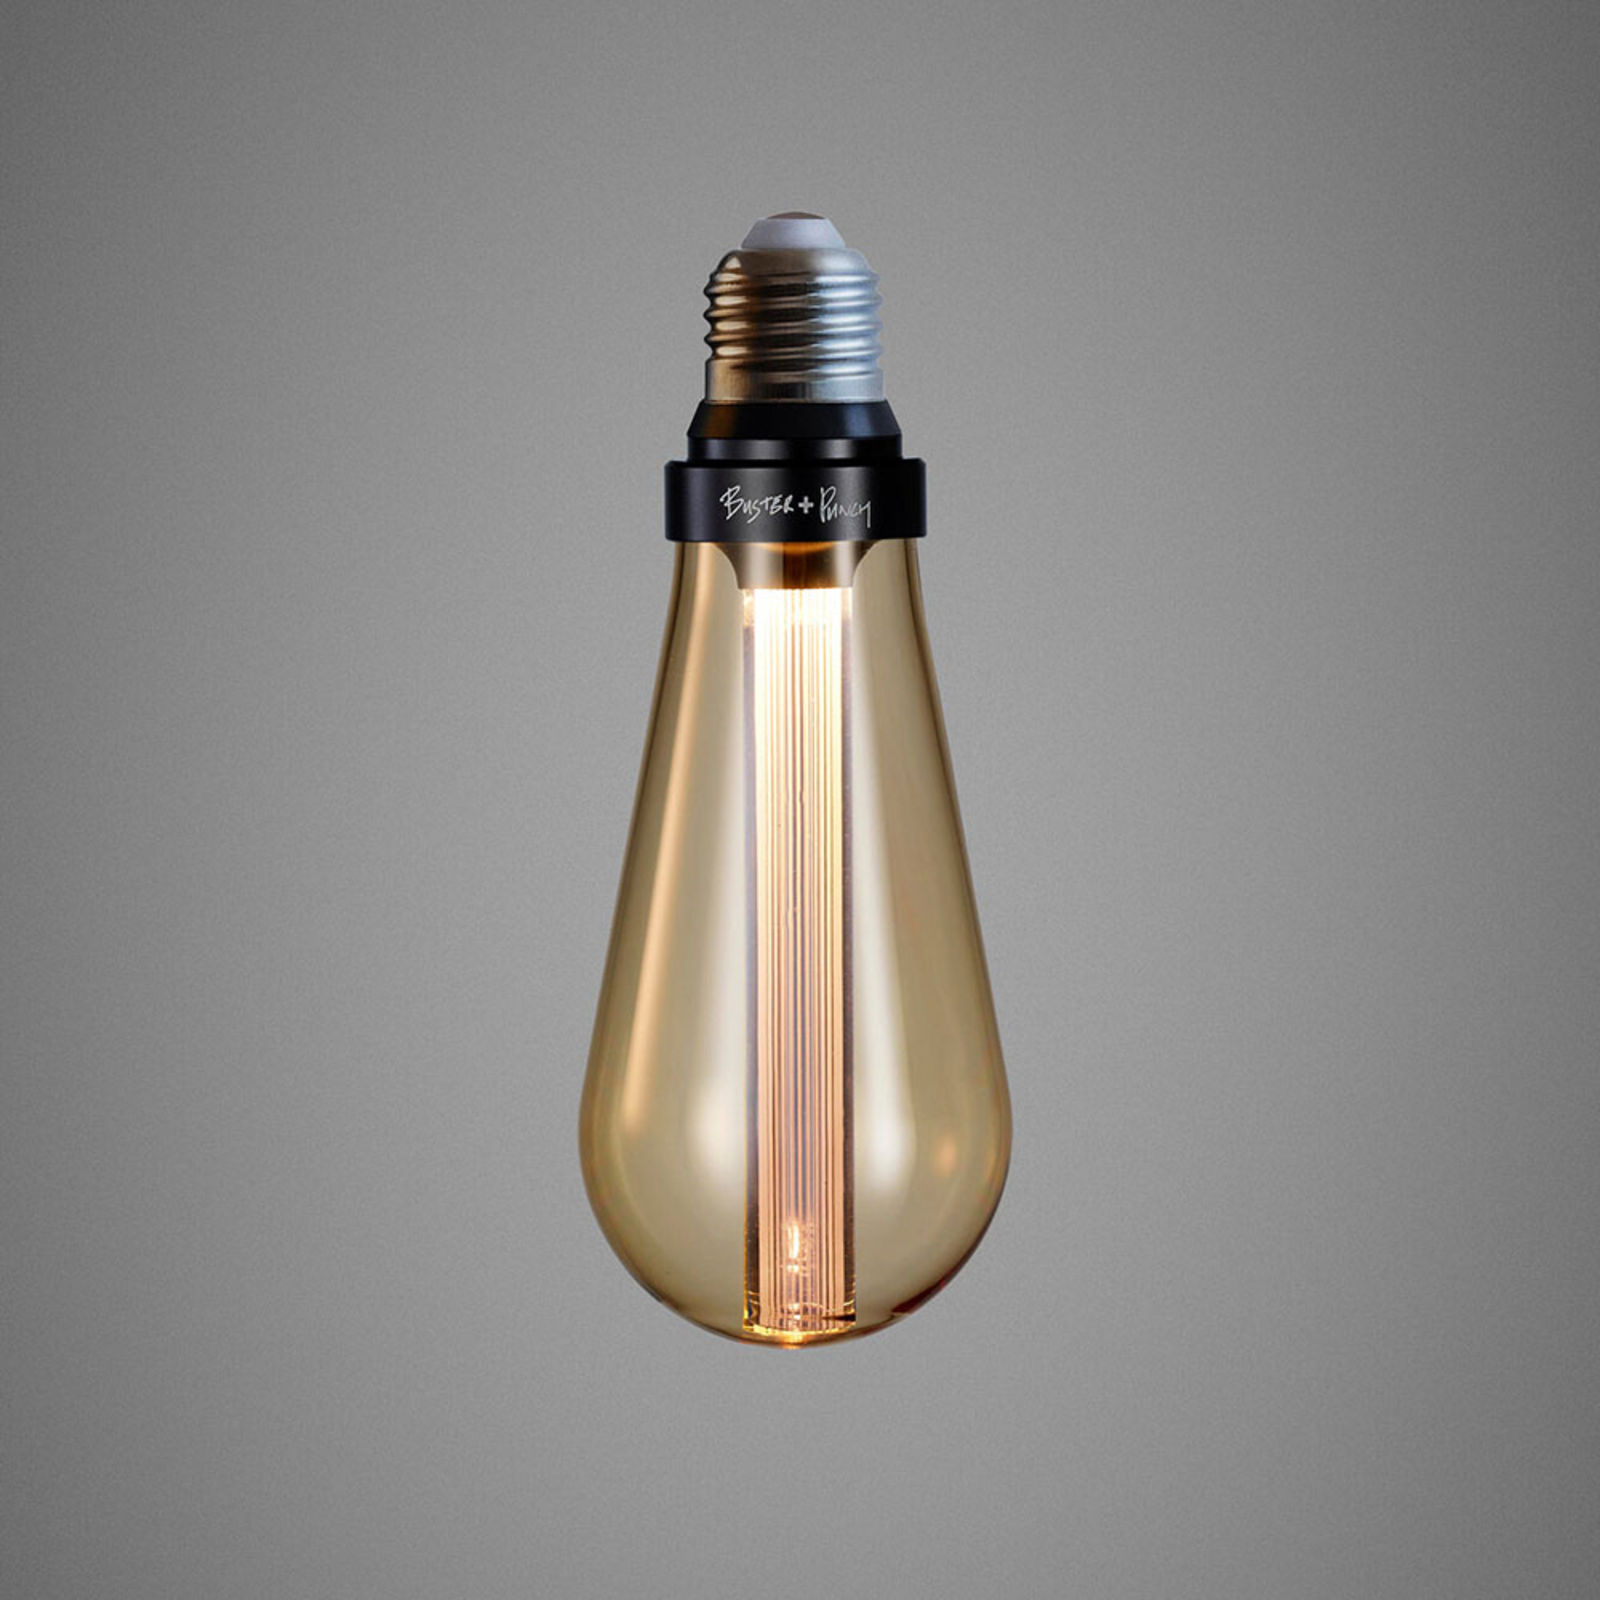 Buster + Punch LED-Lampe E27 5W dimmbar gold